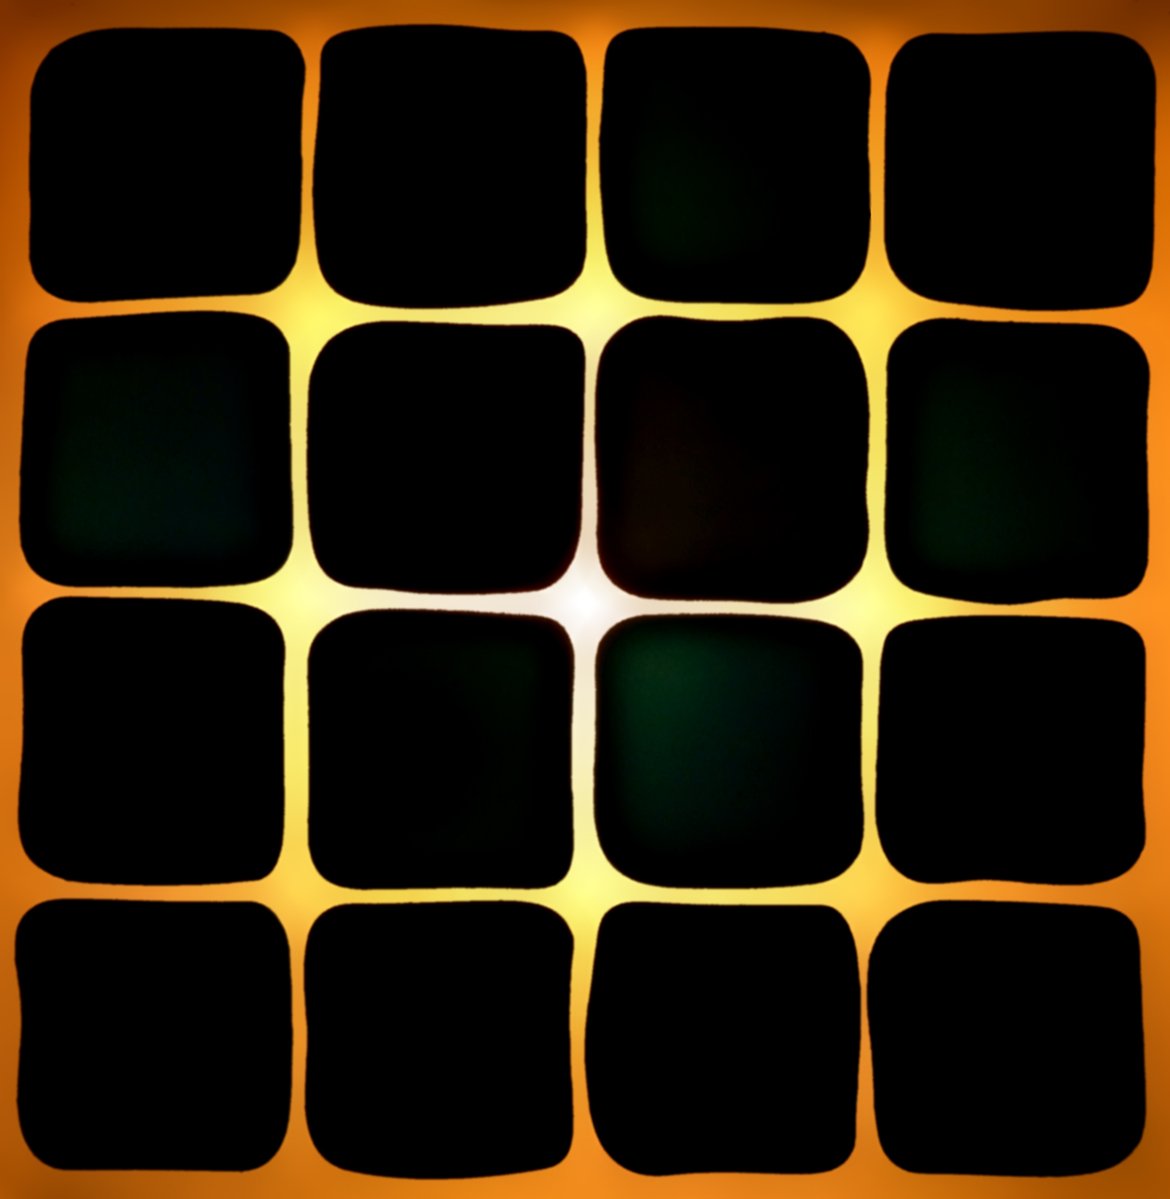 square and circle shapes with orange and black background